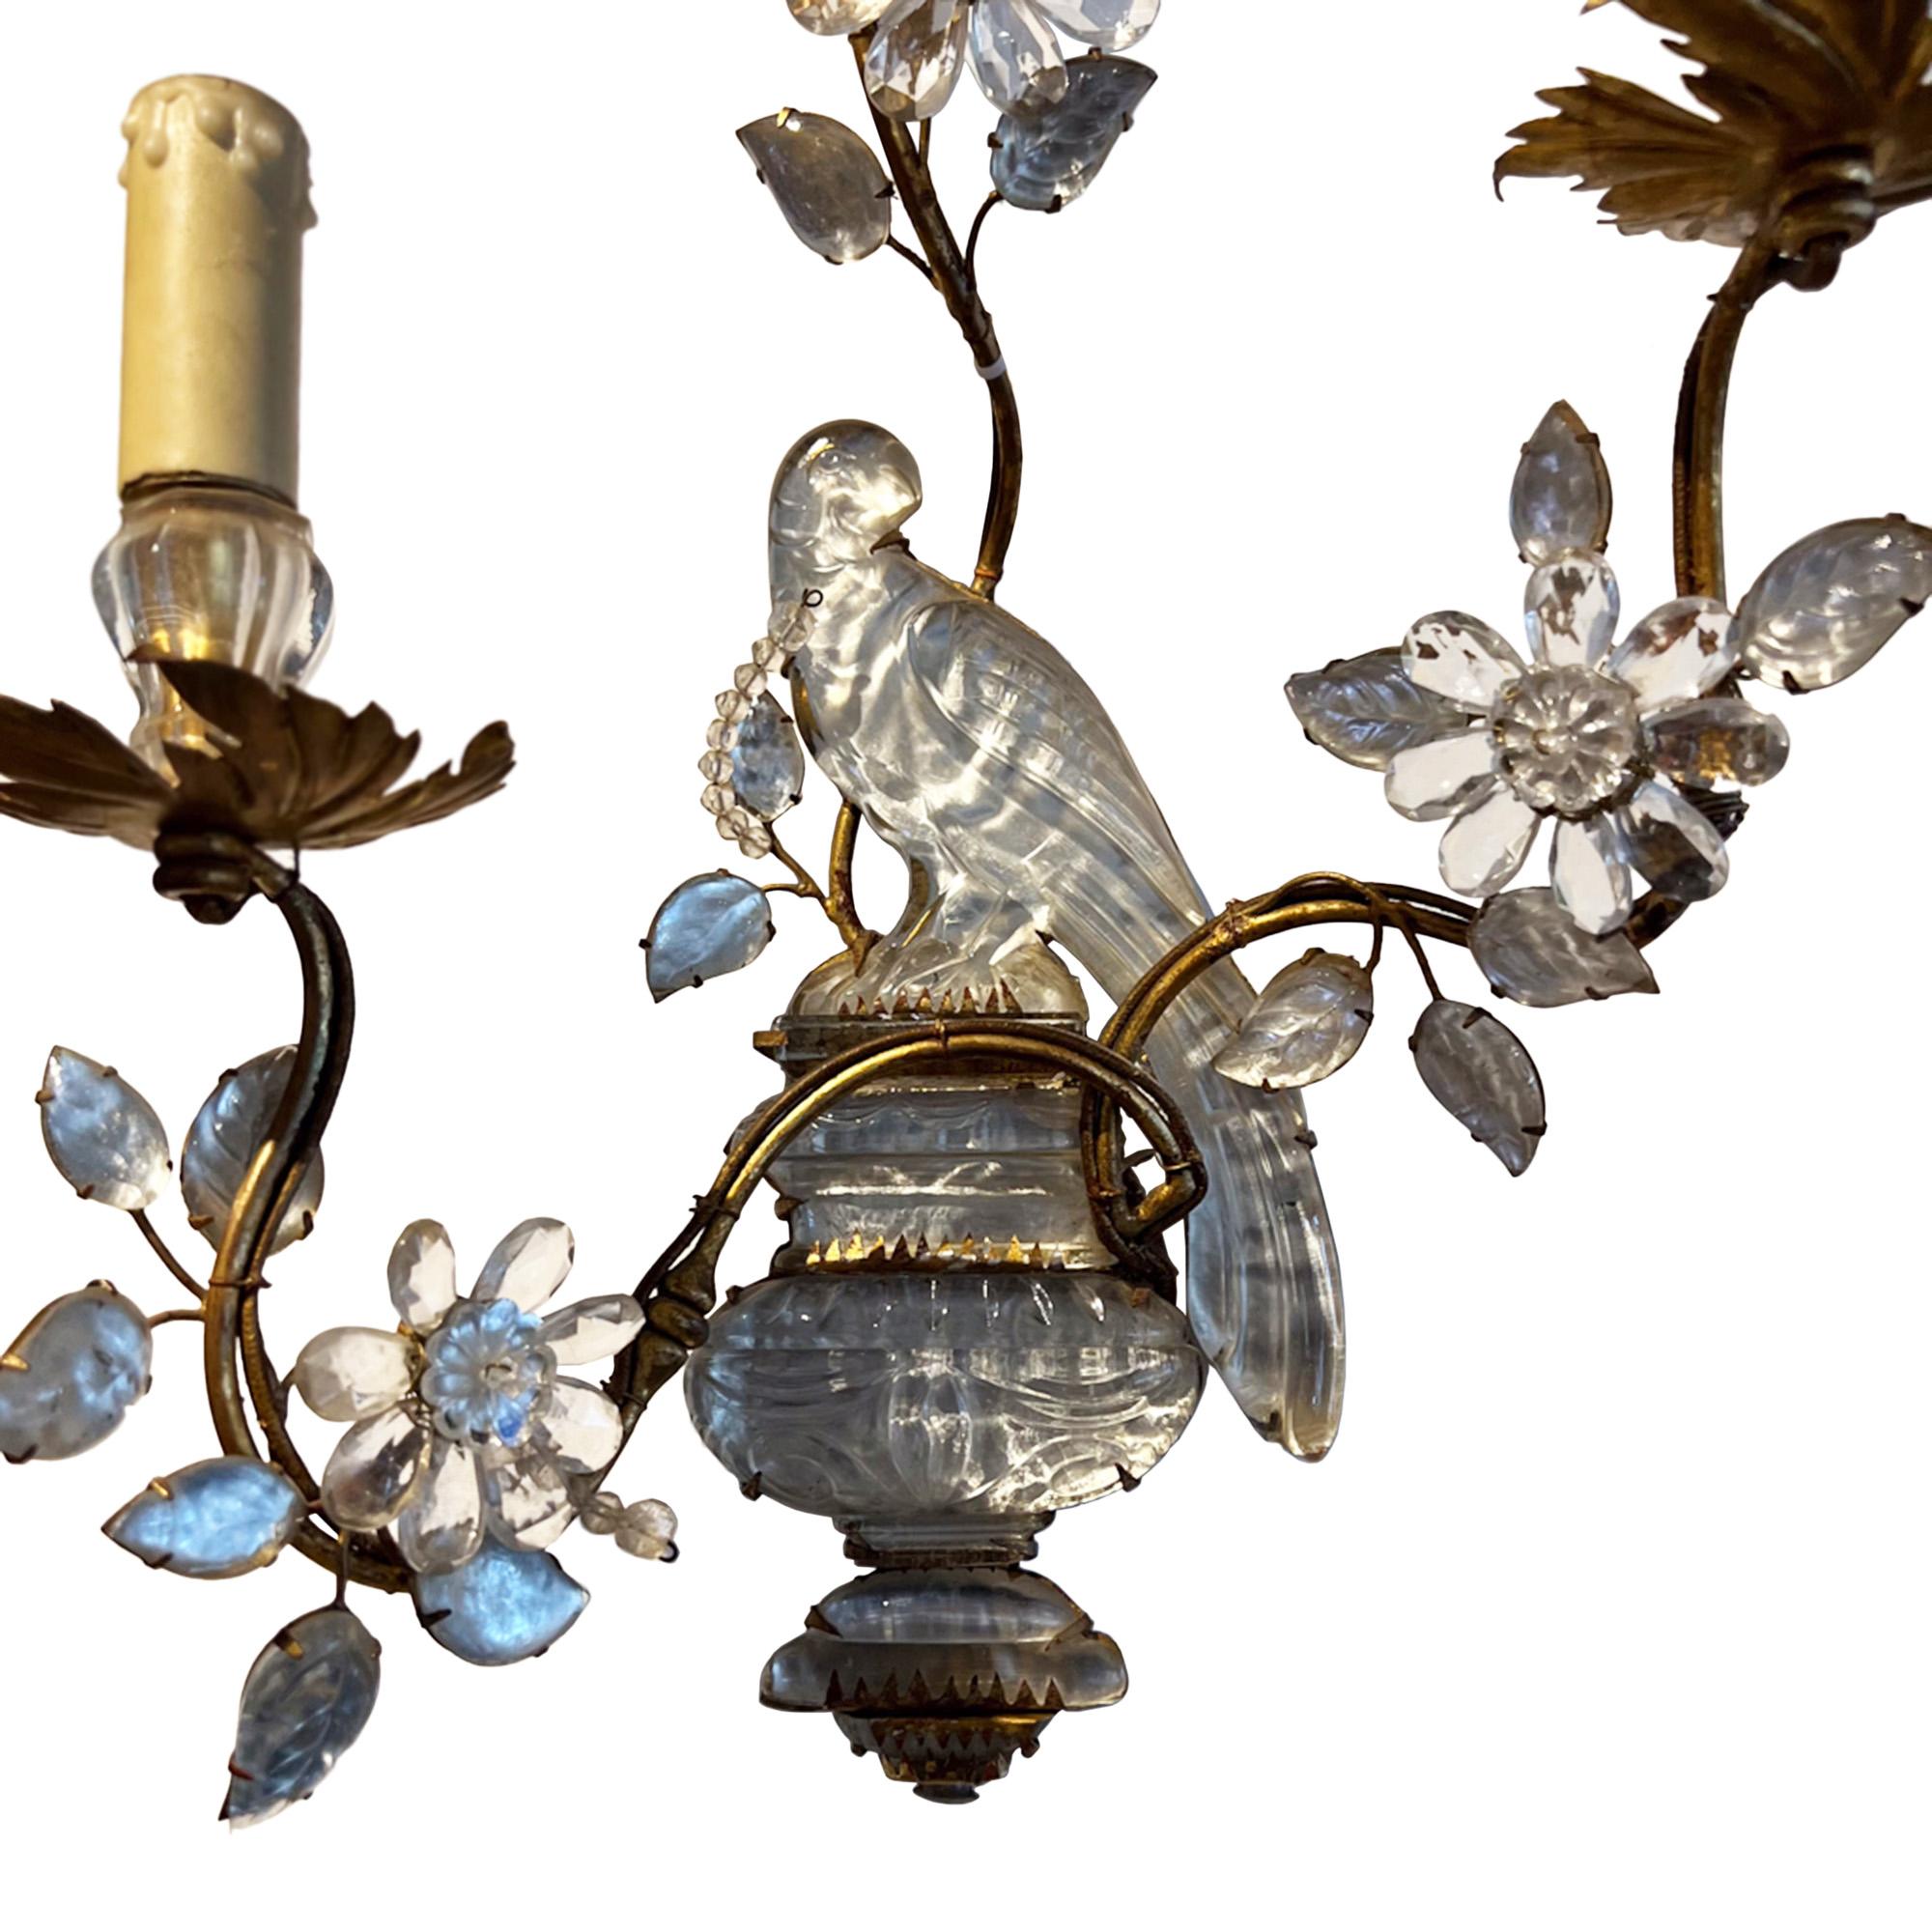 Hand-Crafted Large Pair of Maison Baguès Wall Sconces With Parrot, Urns & 3 Torches For Sale